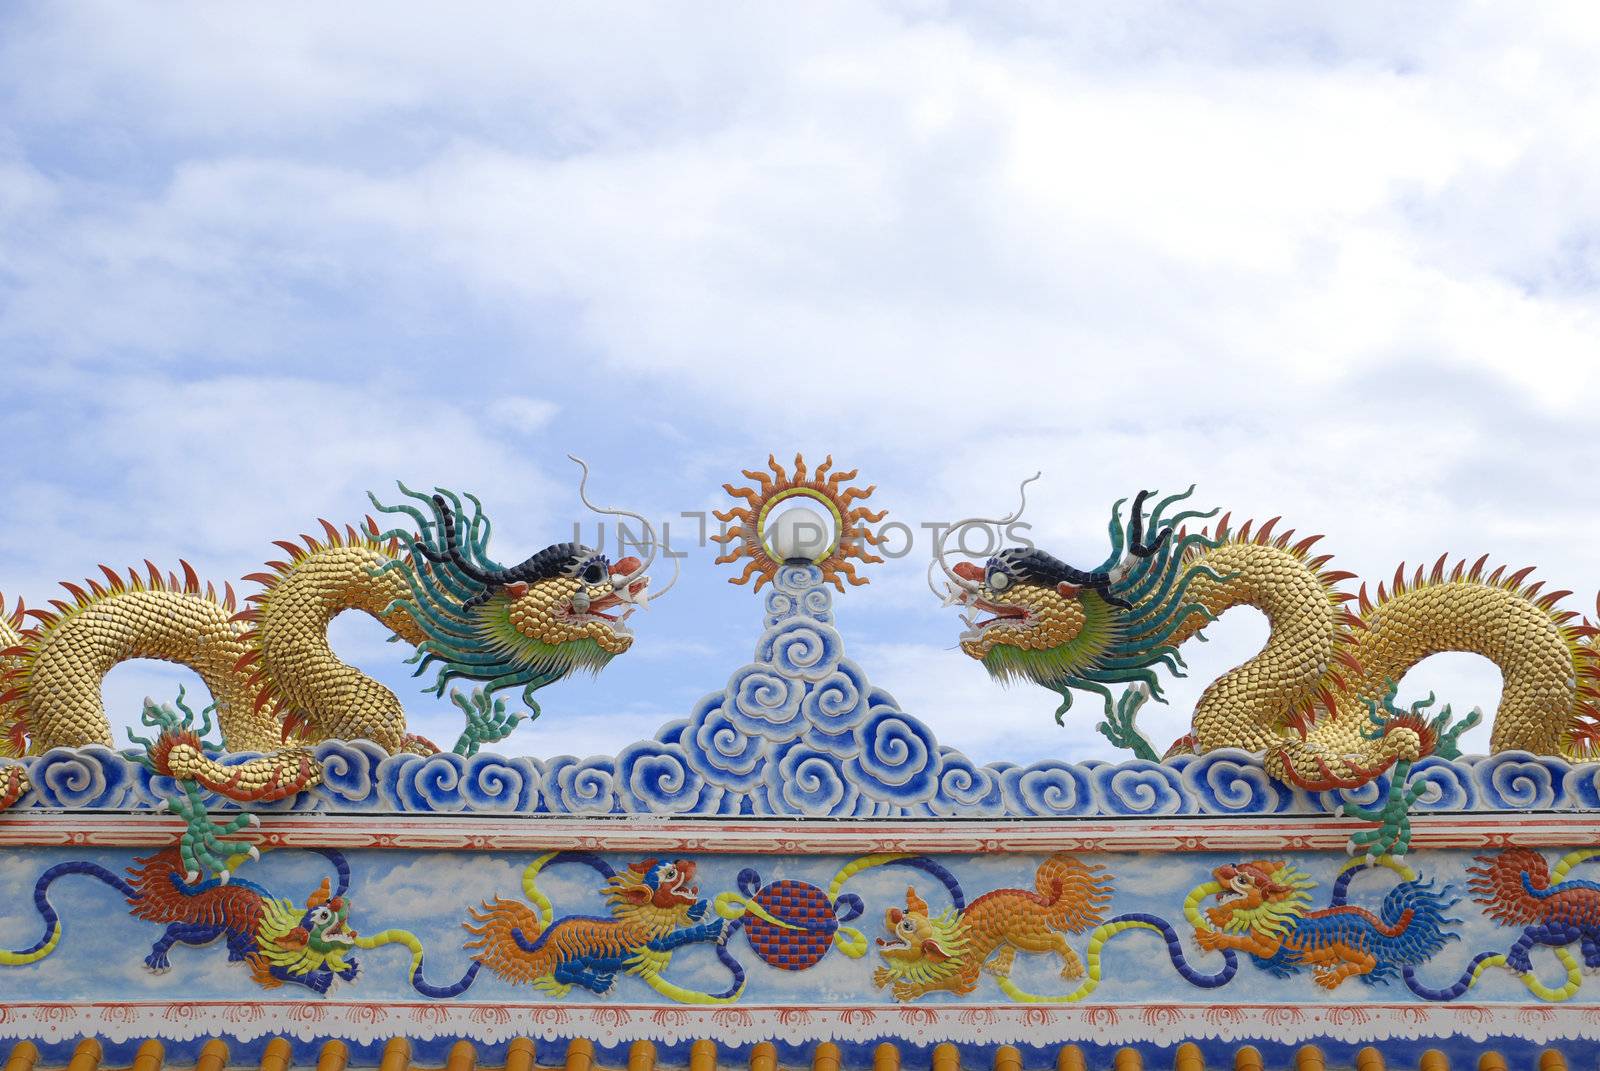 The two old dragons on a roof and blue sky.